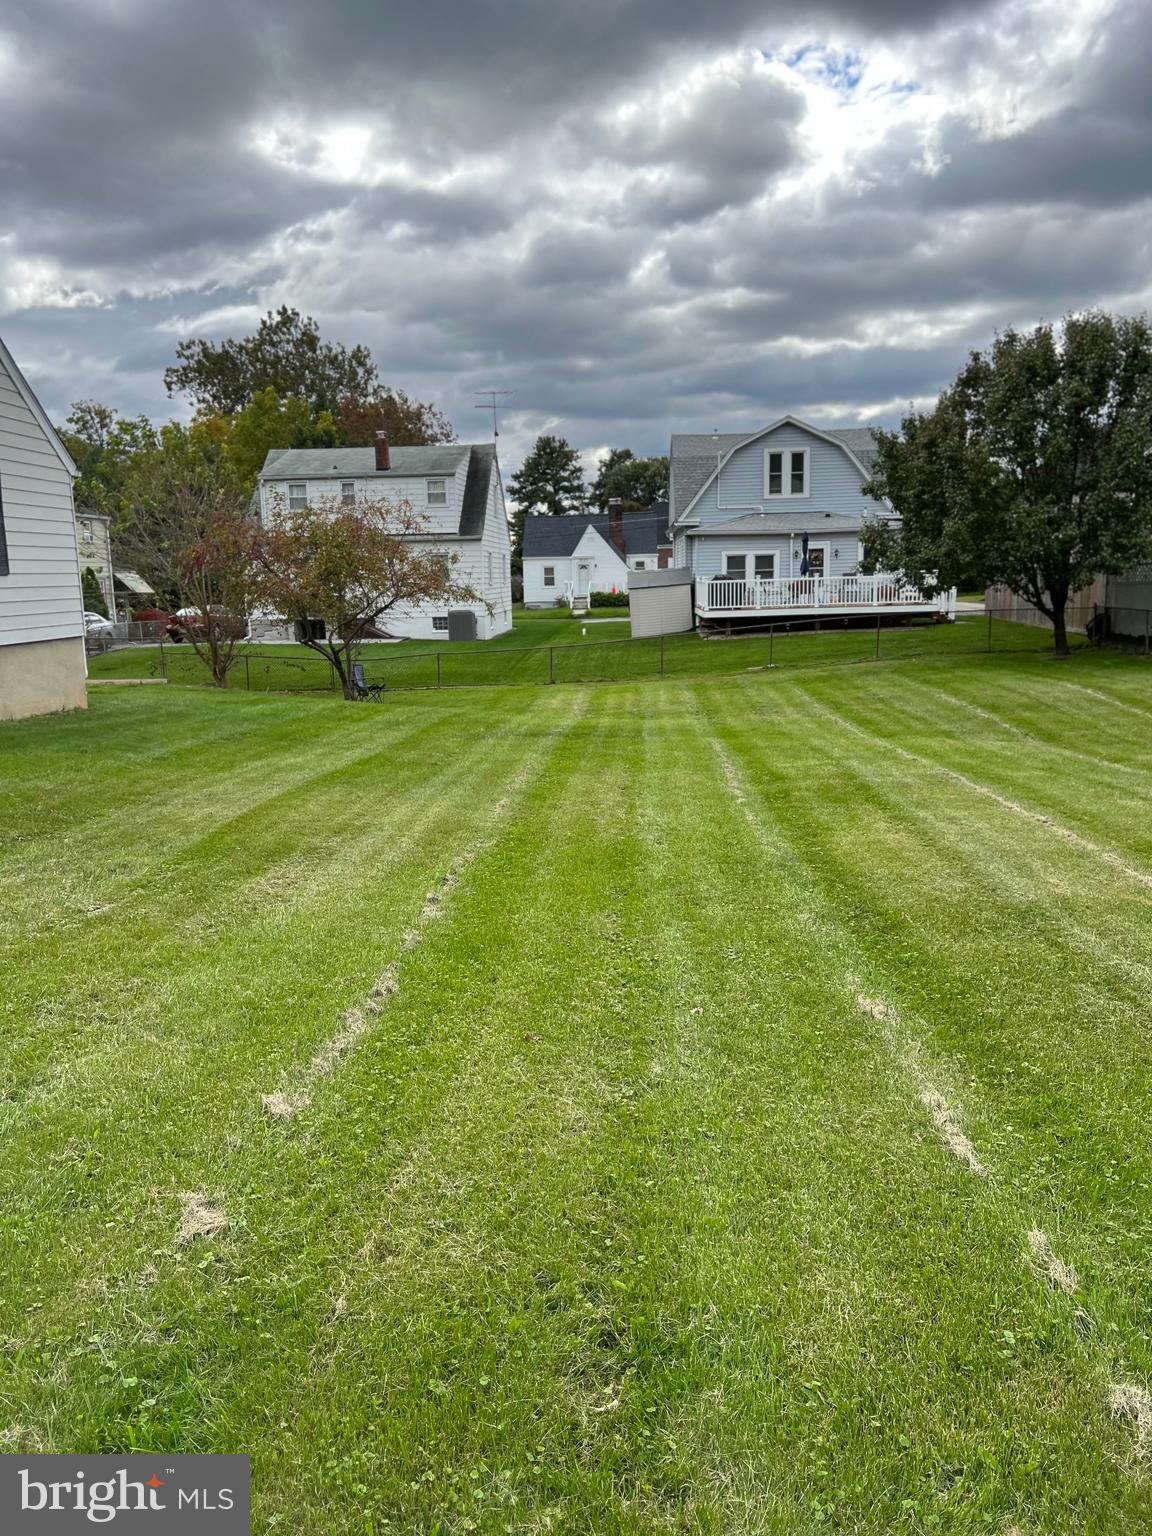 a view of a house with a big yard